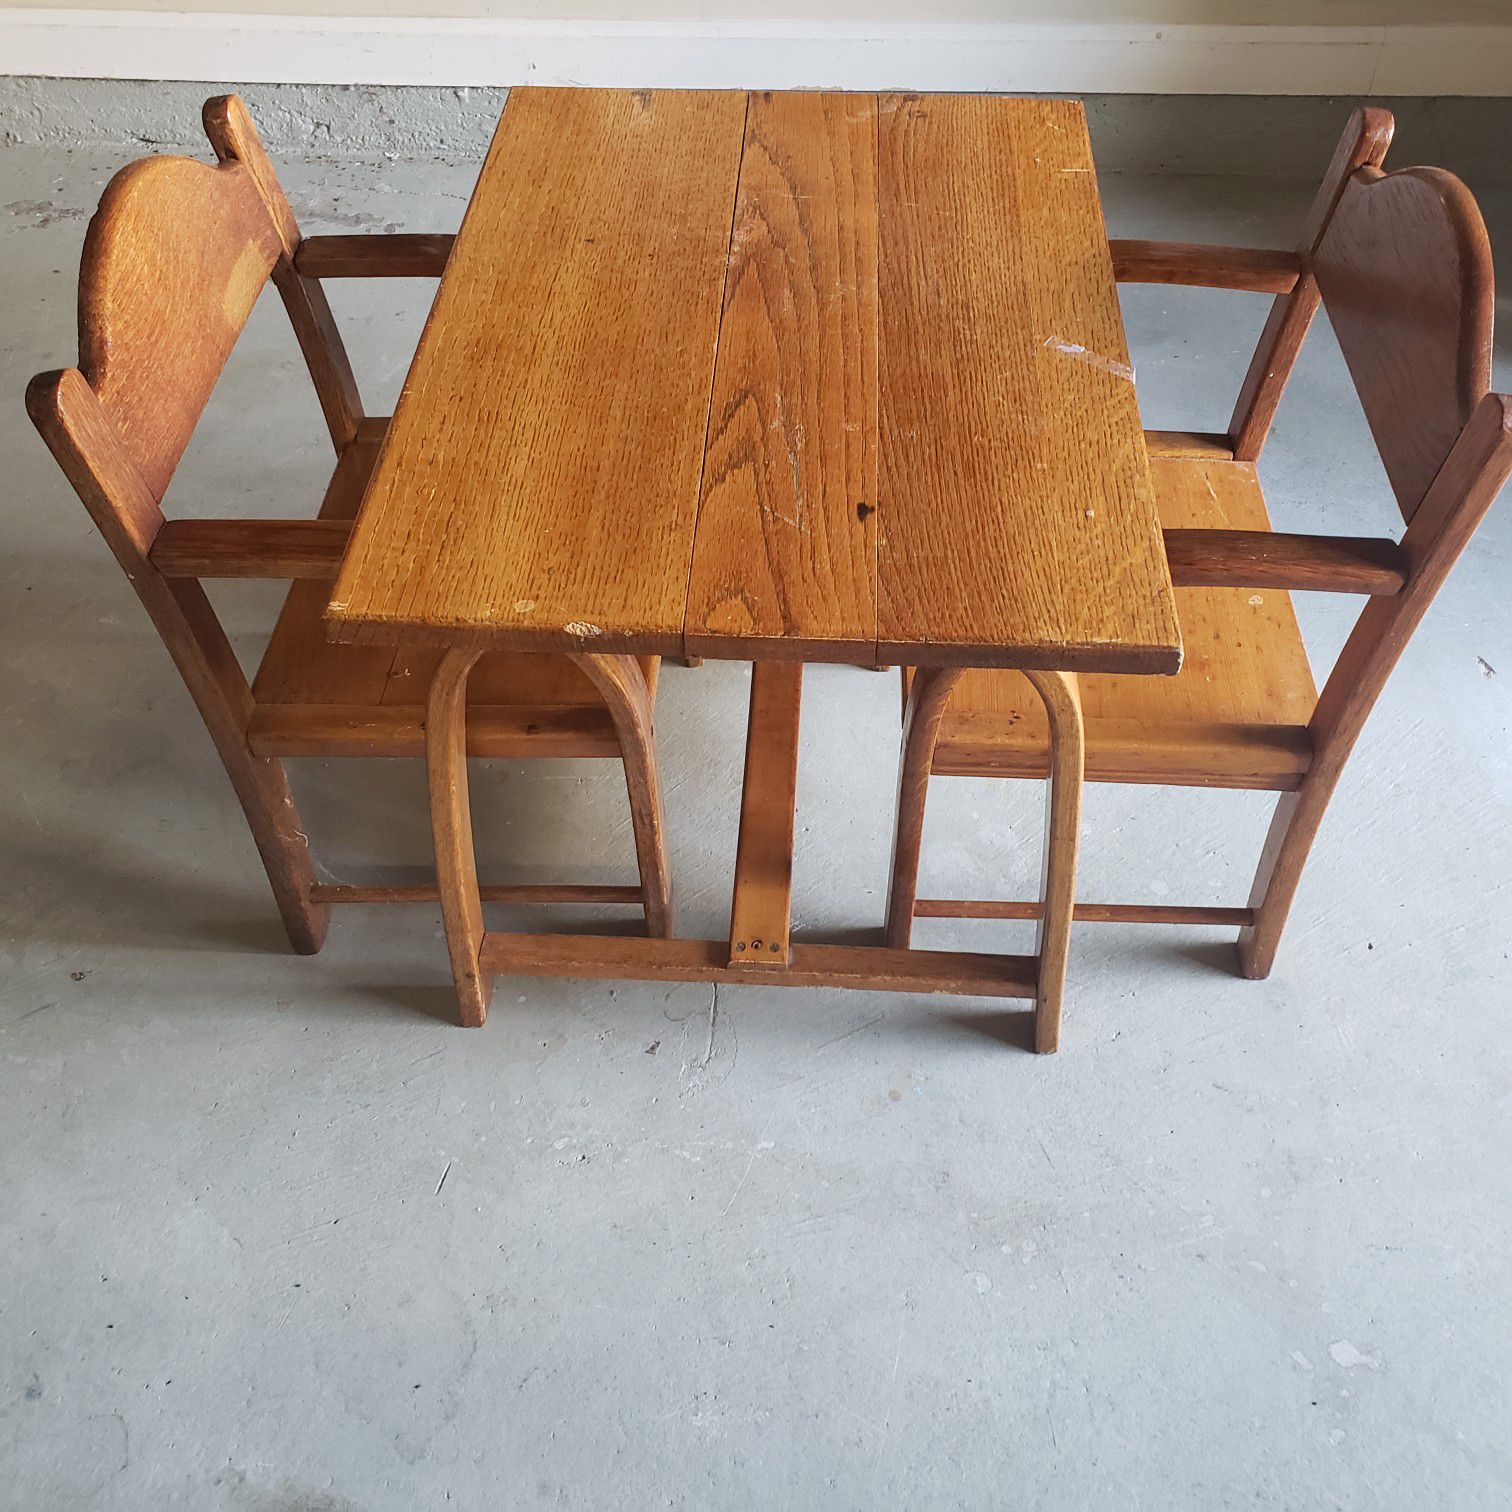 Delphos bending company kids table and chairs